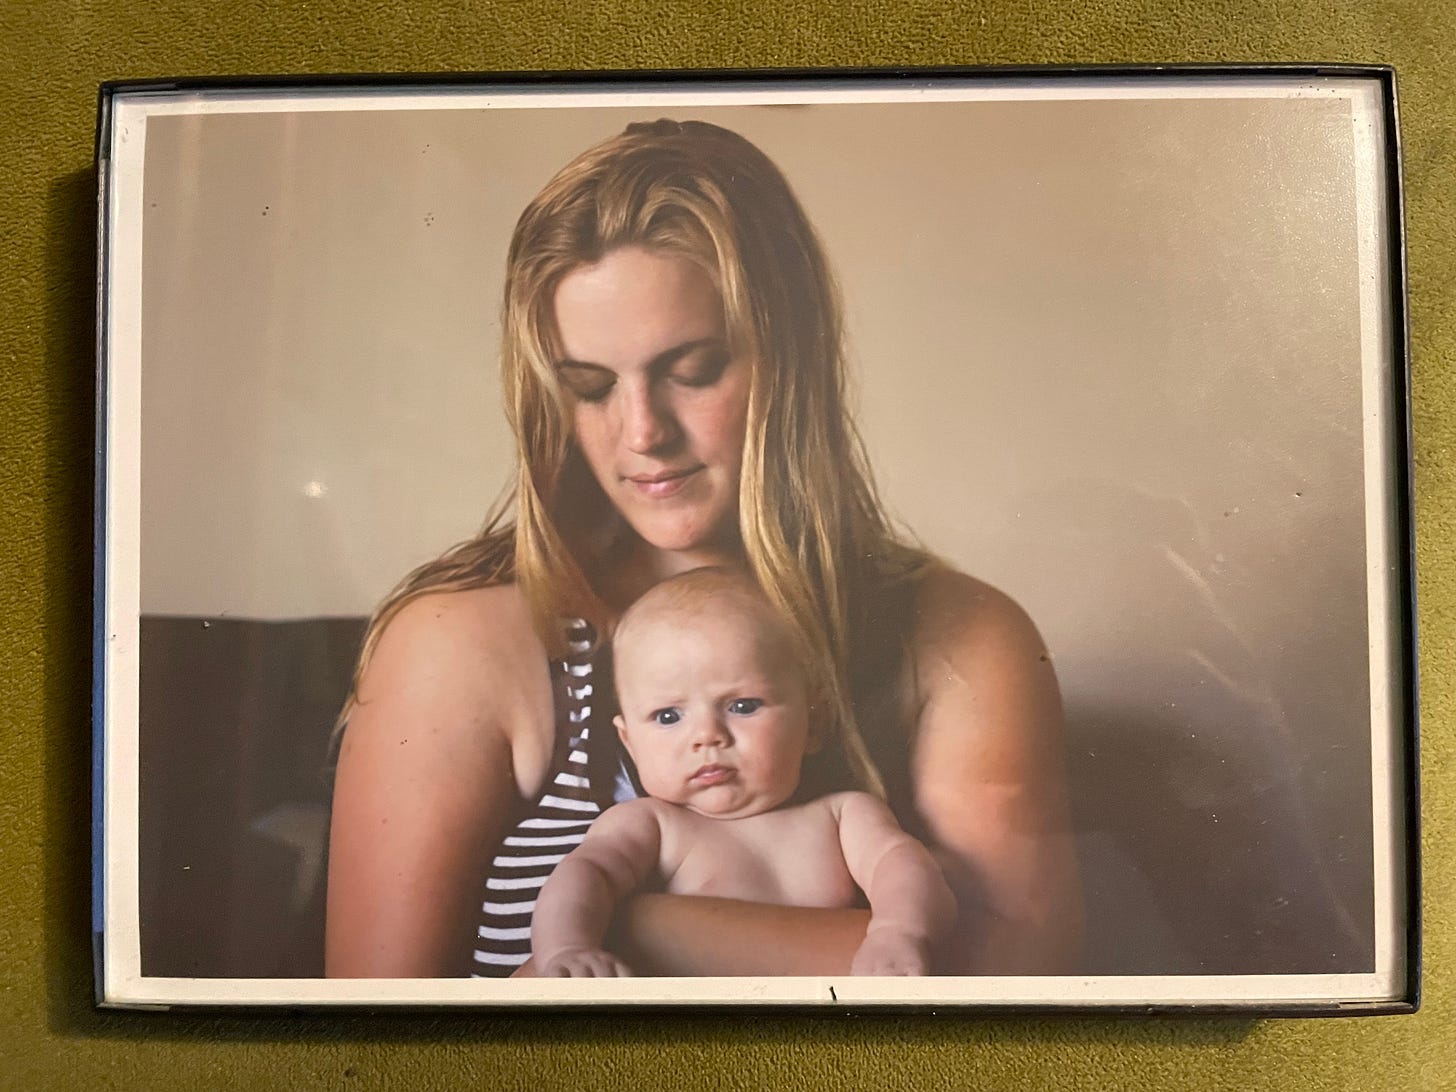 DL is looking down while holding a grumpy 5 month old baby who is very cute. DL's eyes are downcast but she has a very slight smile on her face. Her hair is slightly wet and she is wearing a black and white striped tank top